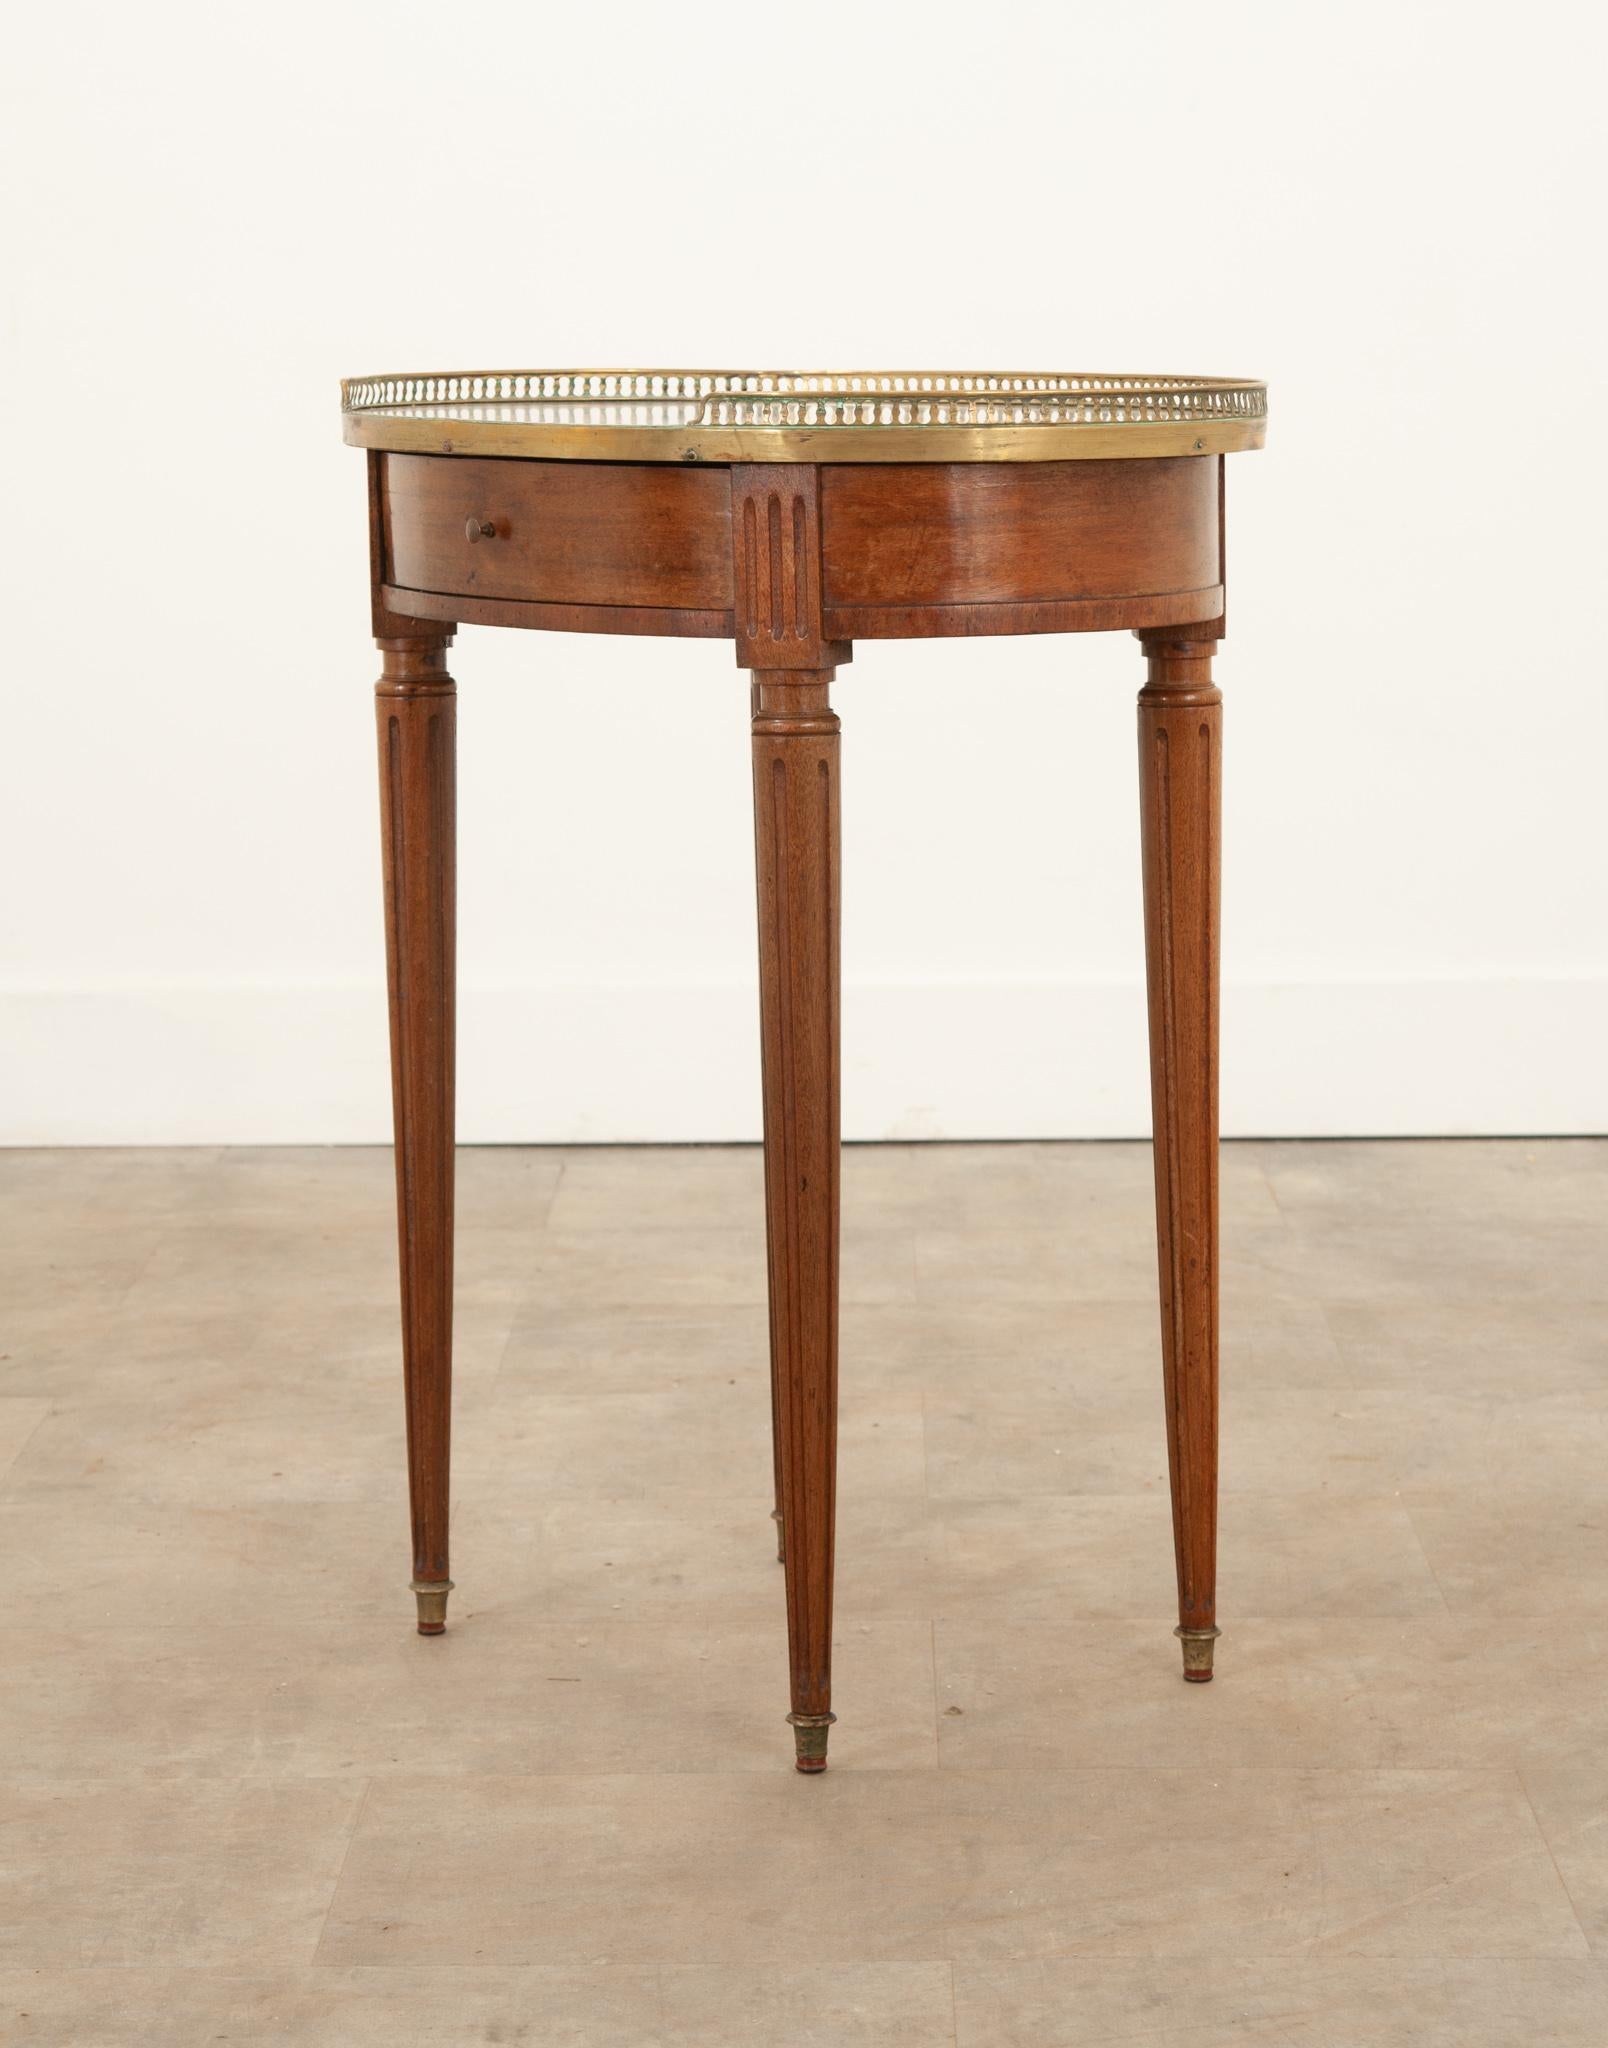 This no- nonsense mahogany table is a fantastic addition to any space. Topped with an inset piece of antique white marble that’s surrounded by a 3/4th pierced brass gallery. The apron is finished on all sides and houses a single drawer with a tiny